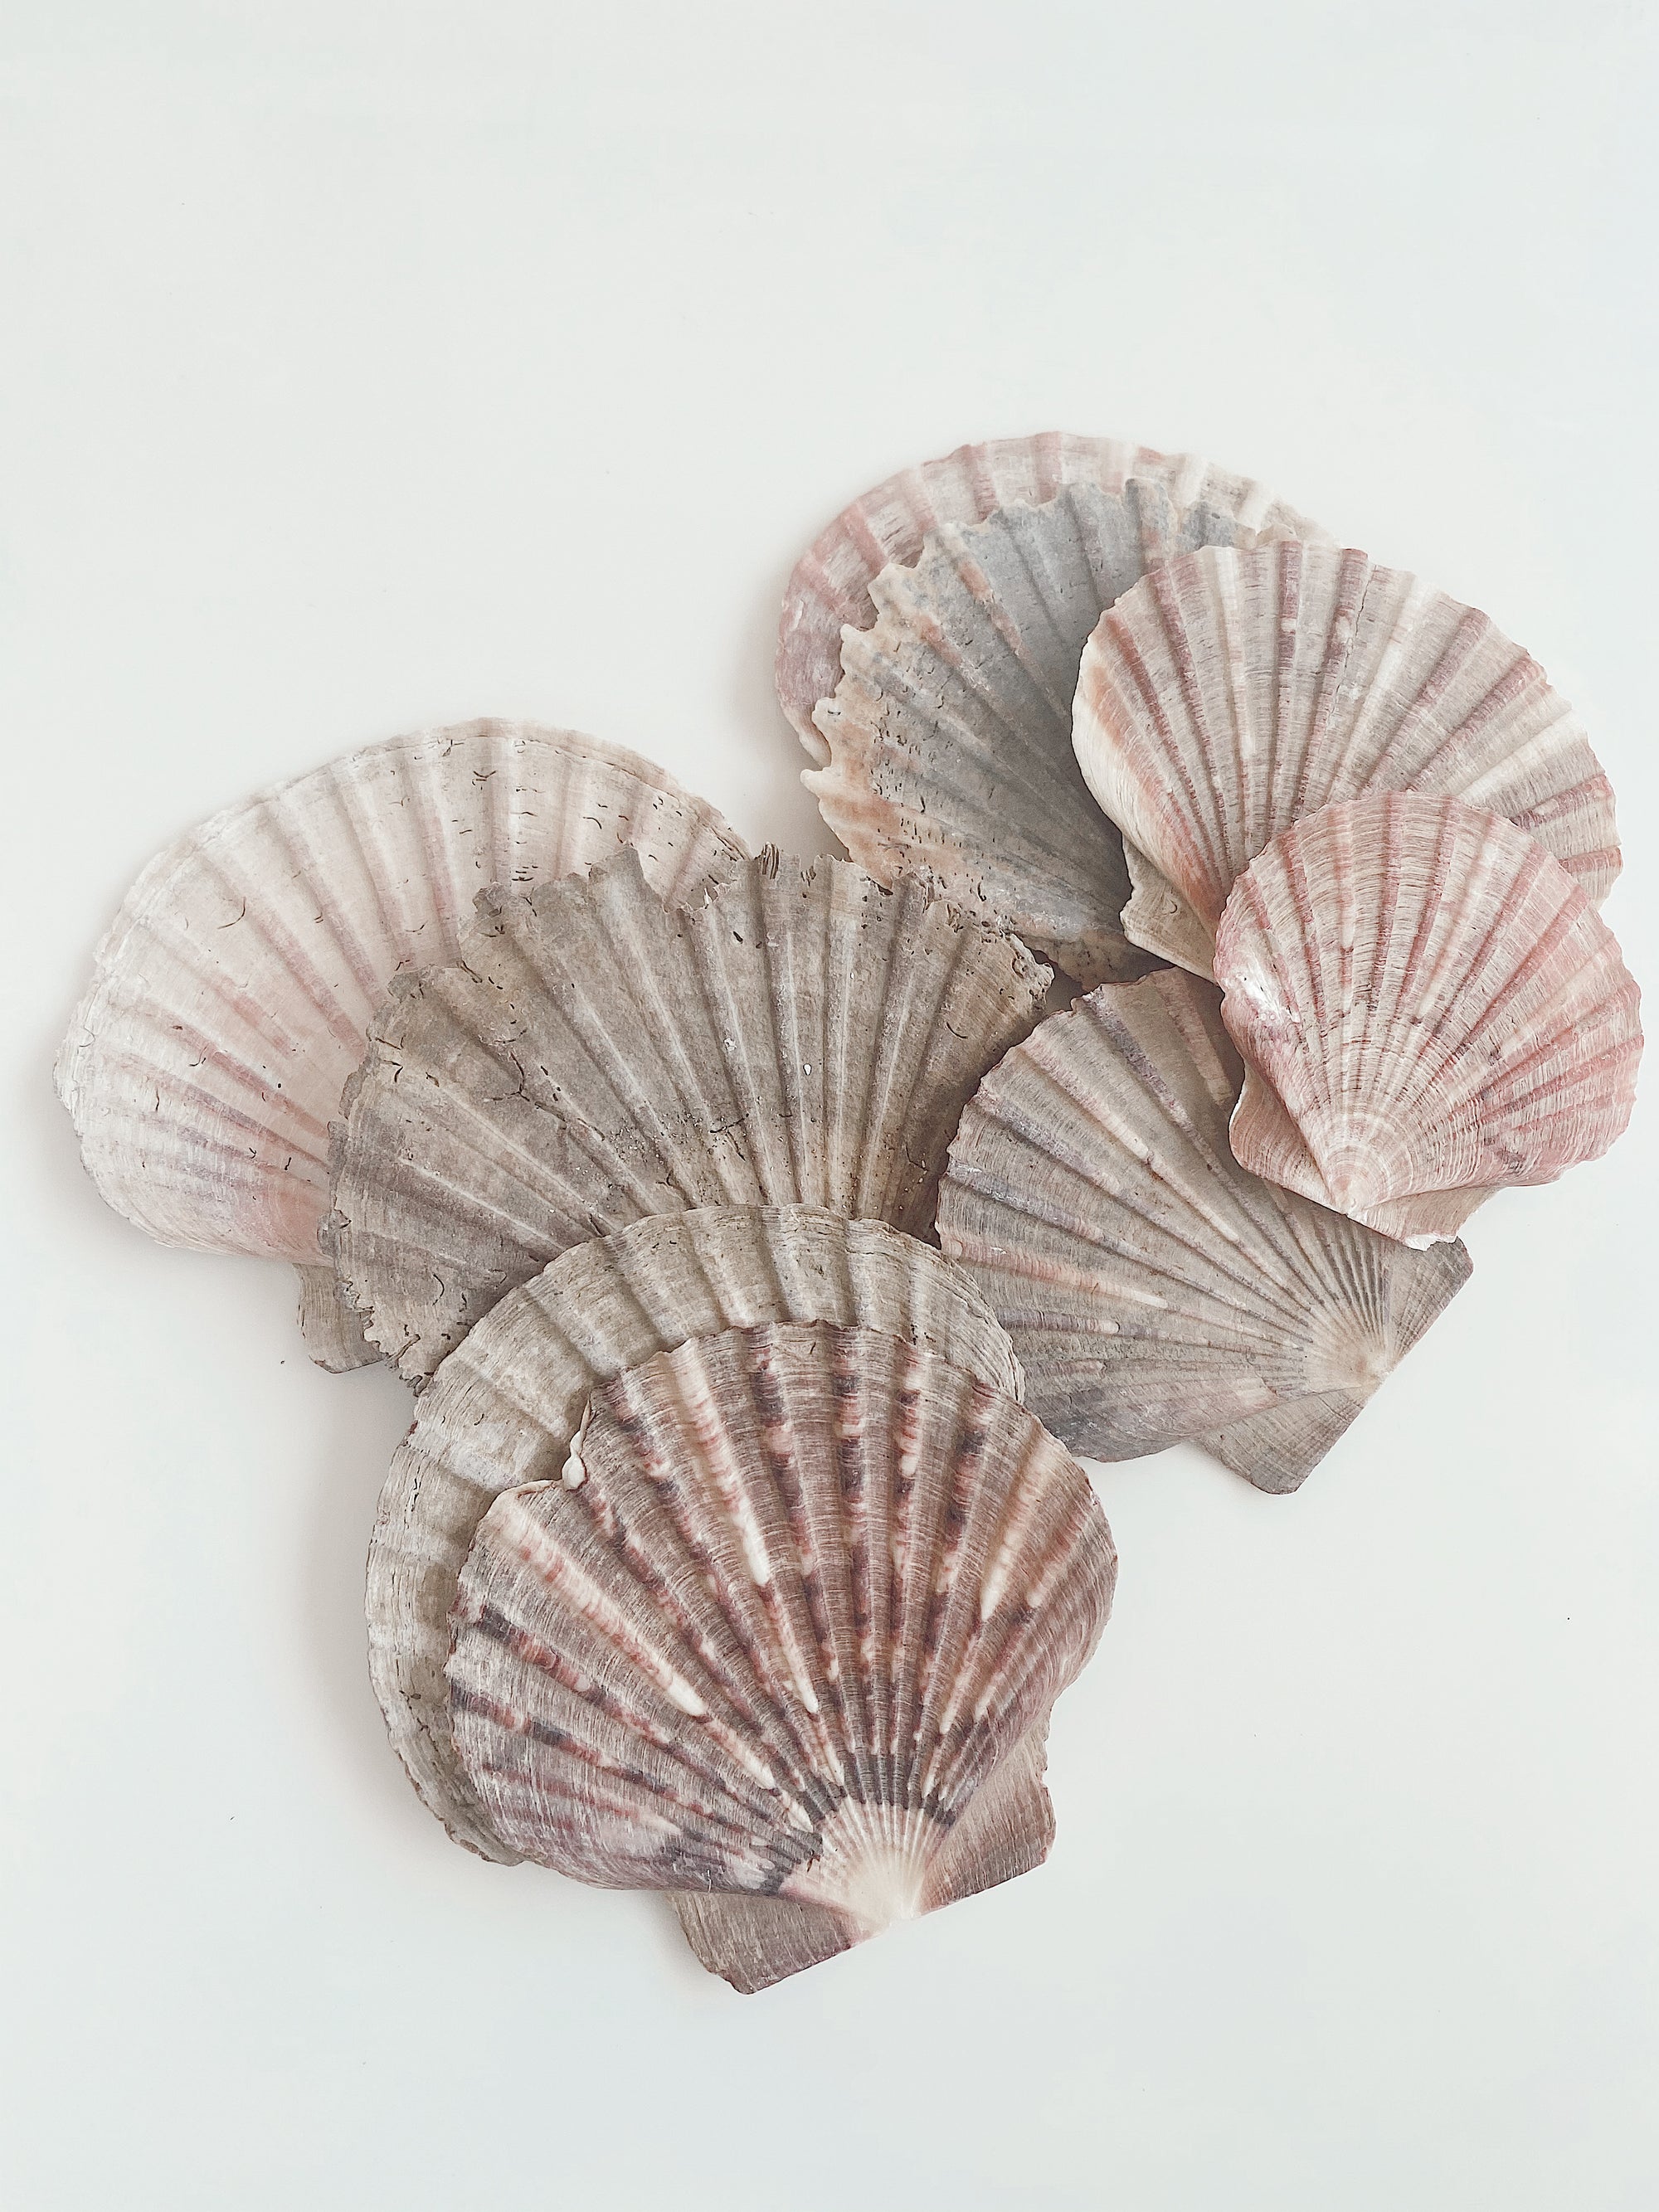 Shells From New Zealand